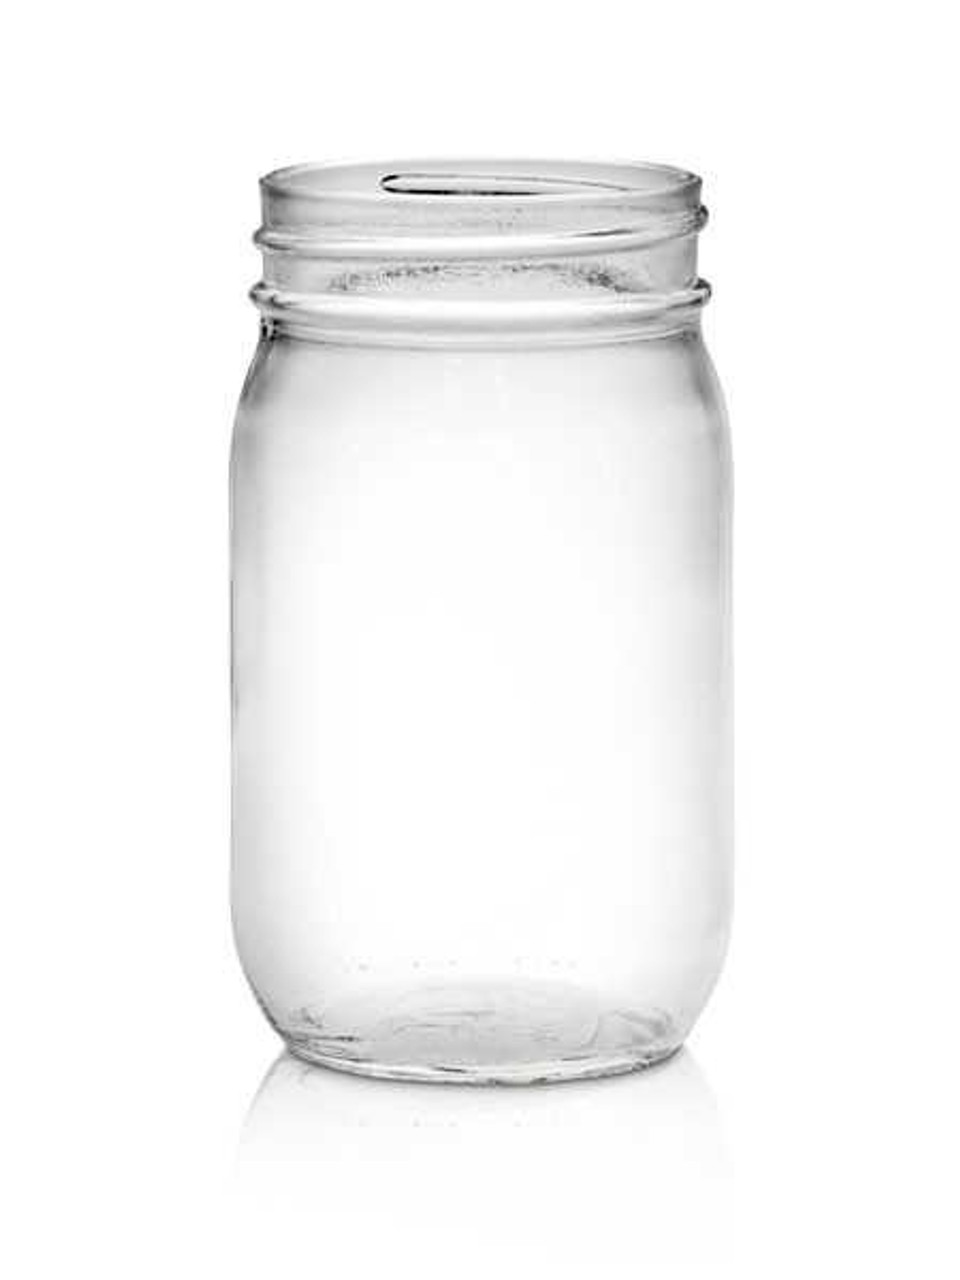 https://cdn11.bigcommerce.com/s-1ybtx/images/stencil/1280x1280/products/842/6038/16-oz-Mason-Glass-Jar-with-your-choice-of-lid-Pint-Made-In-USA_2603__12675.1674334352.jpg?c=2?imbypass=on